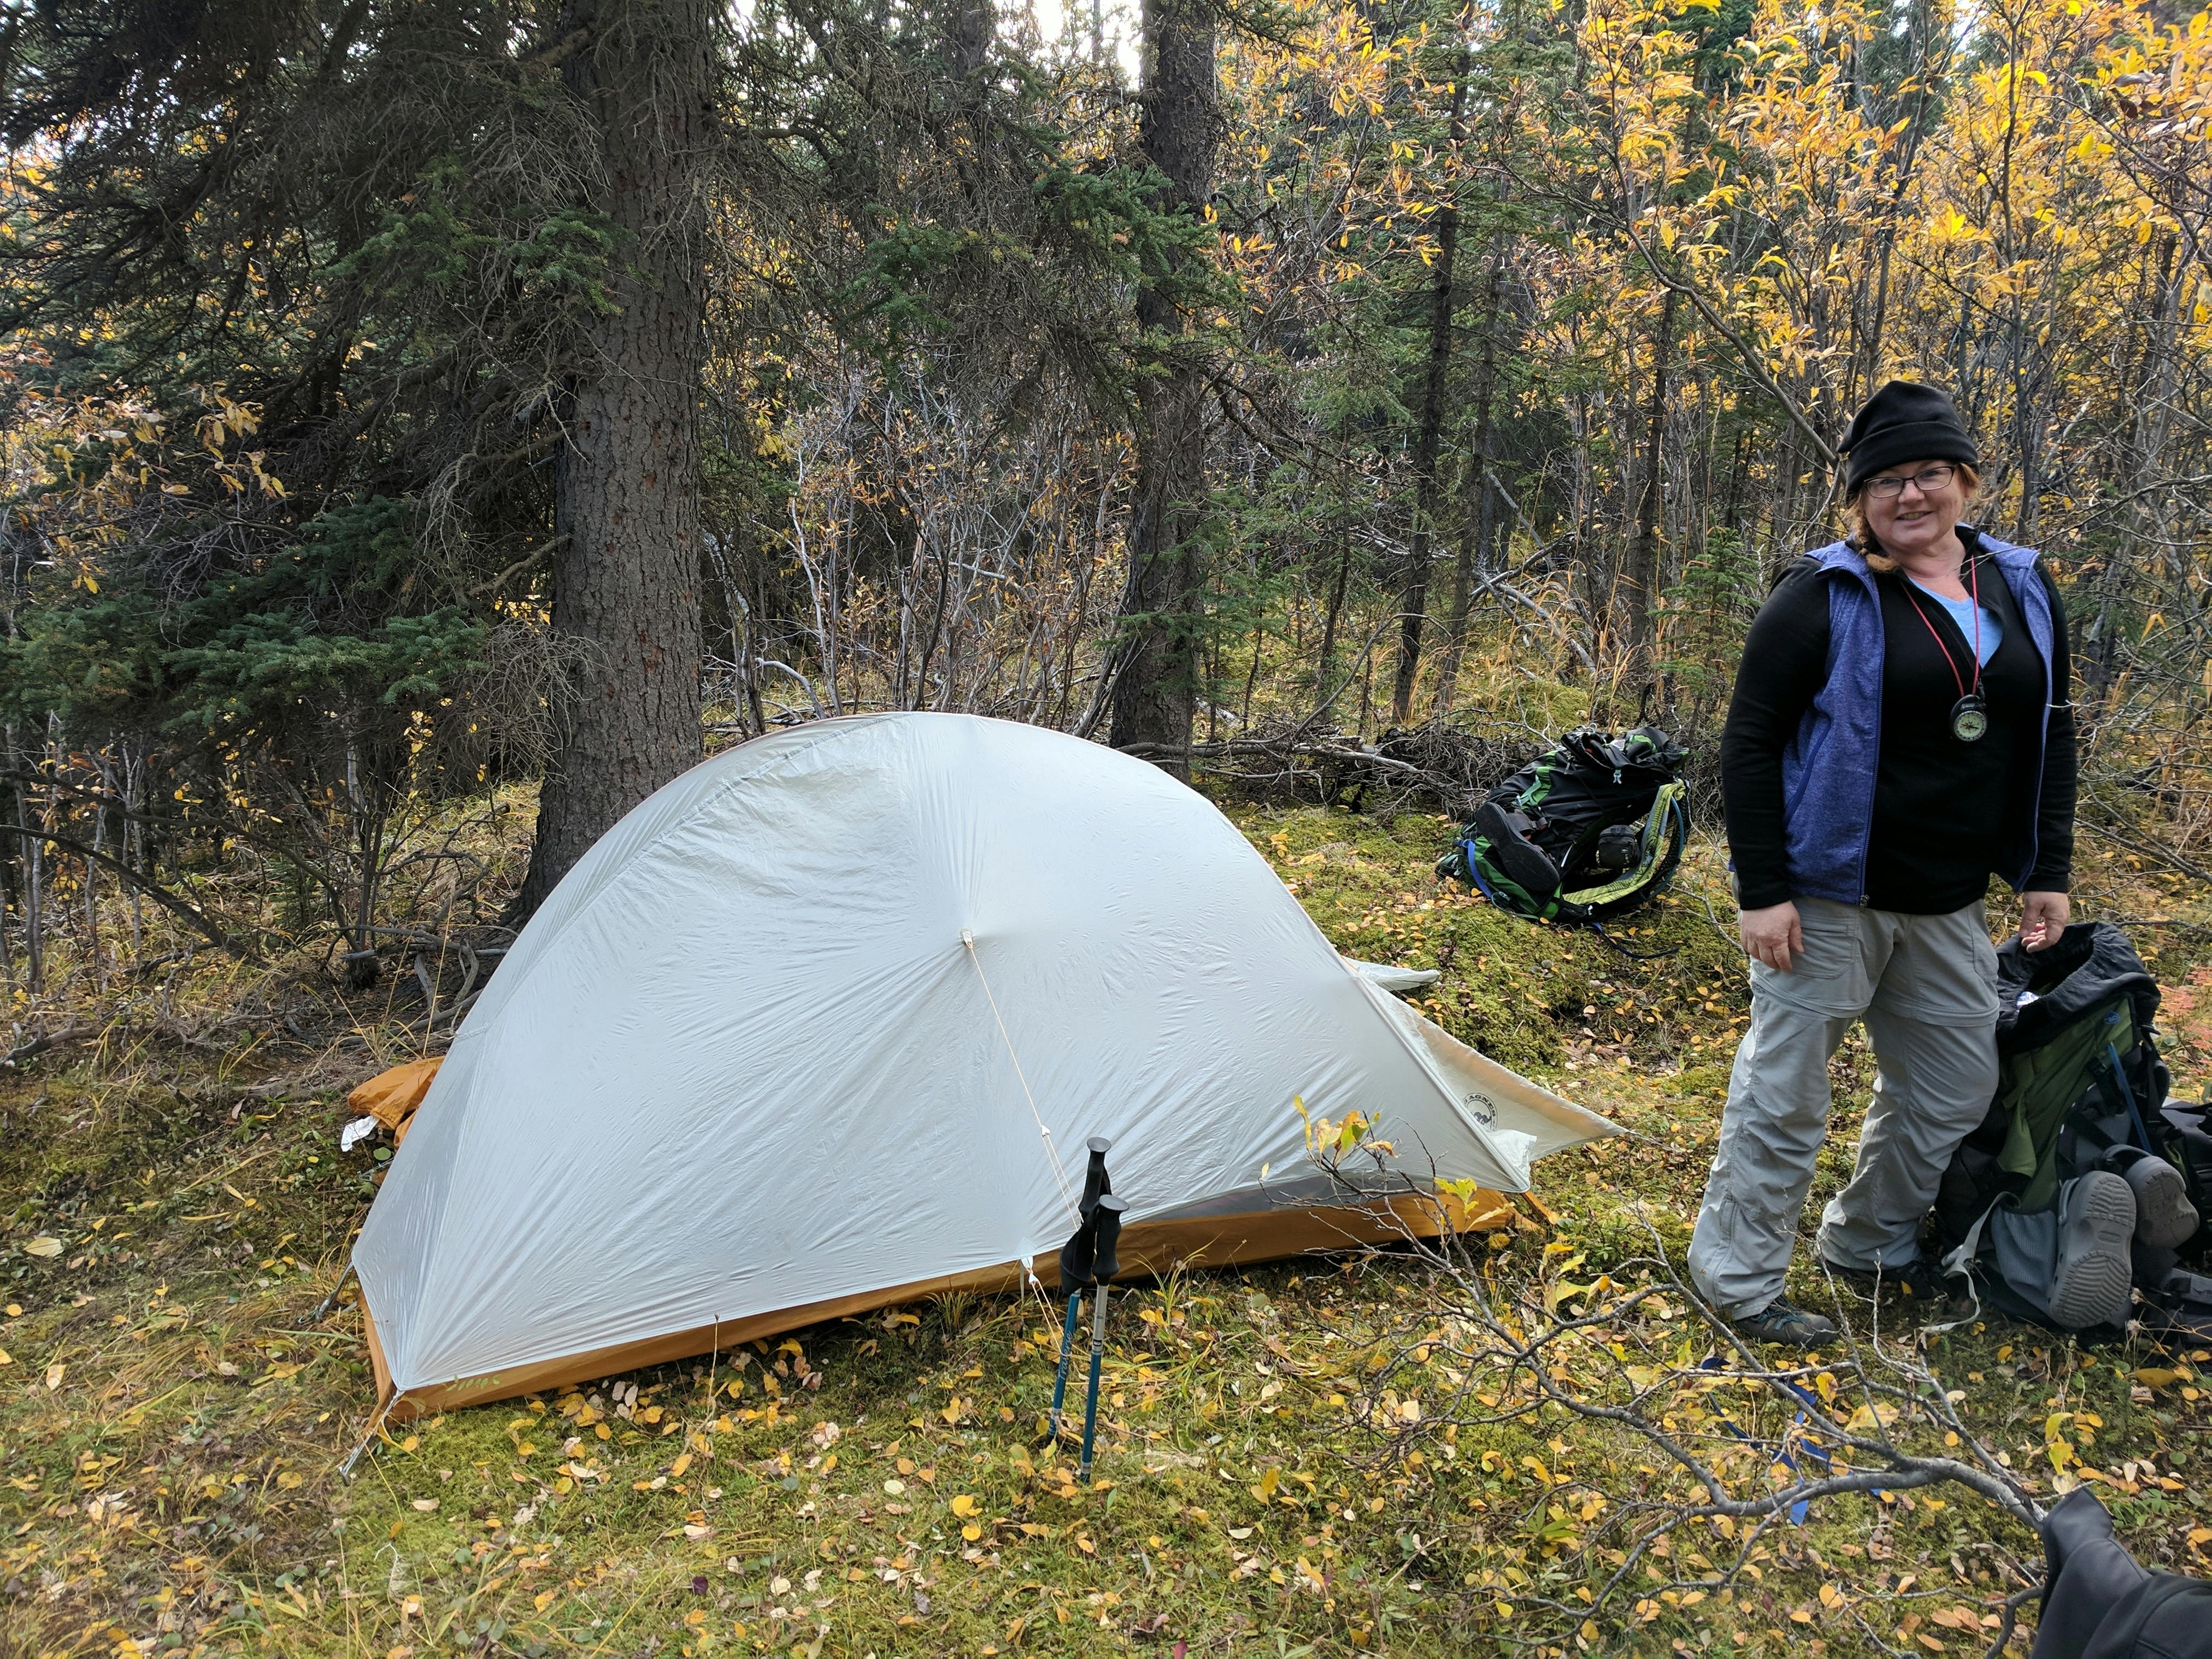 A tent and a woman with a backpack in a forest.